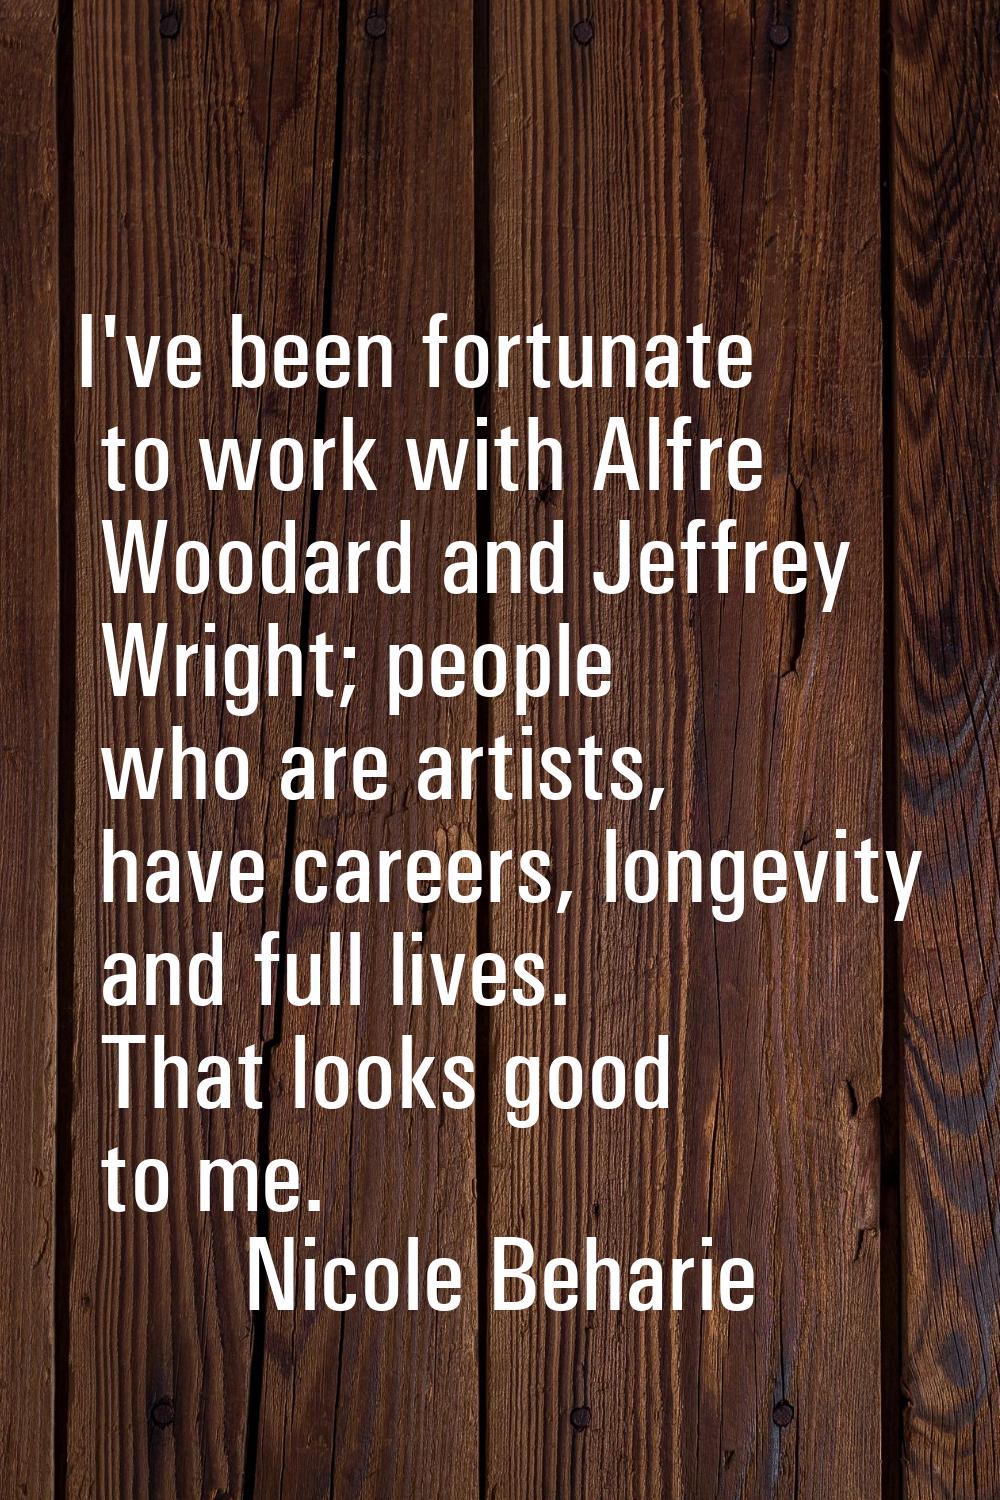 I've been fortunate to work with Alfre Woodard and Jeffrey Wright; people who are artists, have car